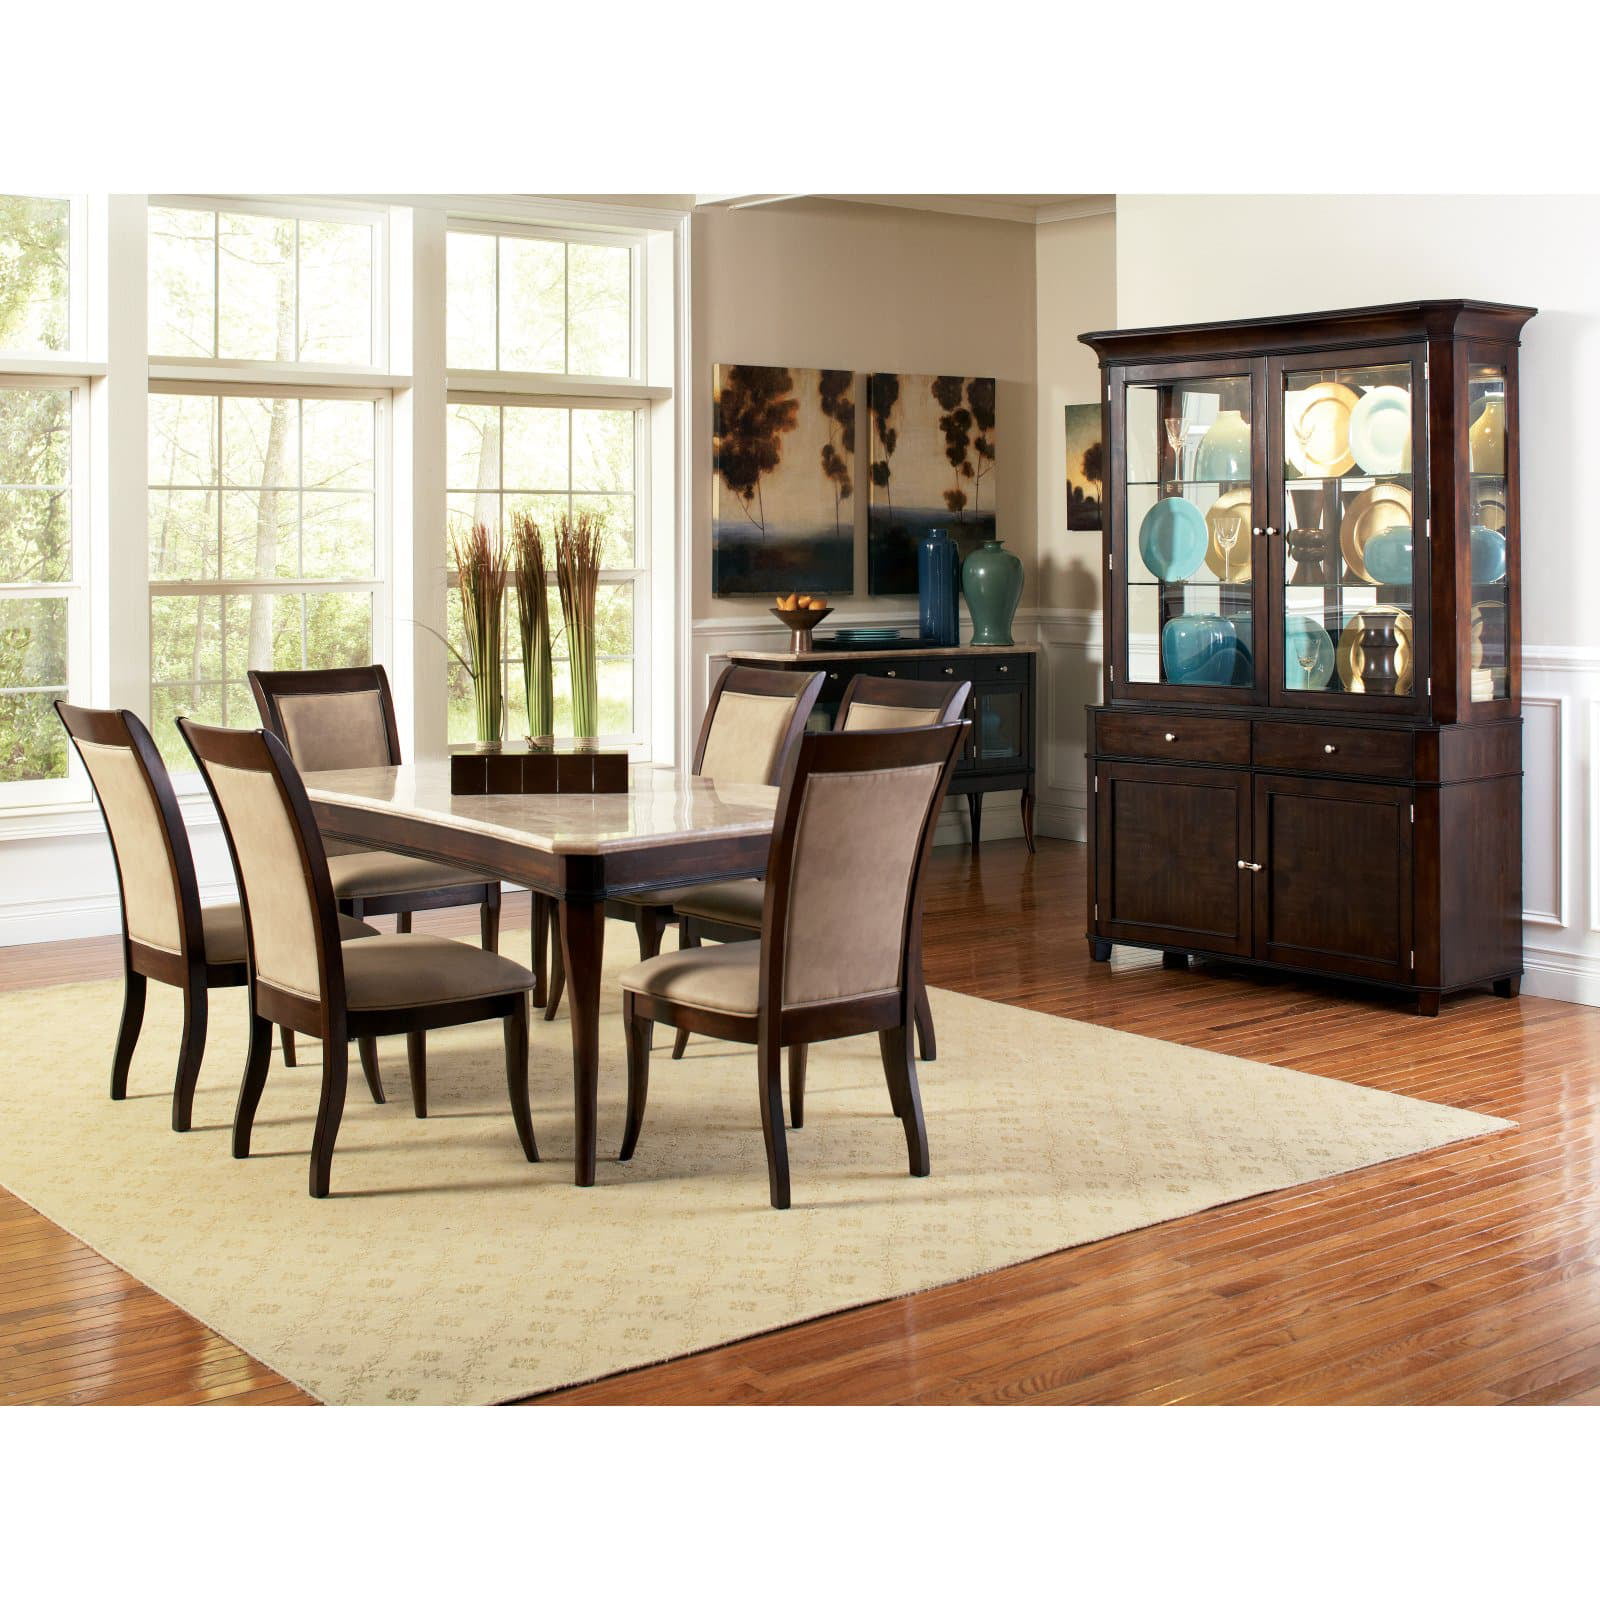 New Walmart Dining Table Set for Large Space